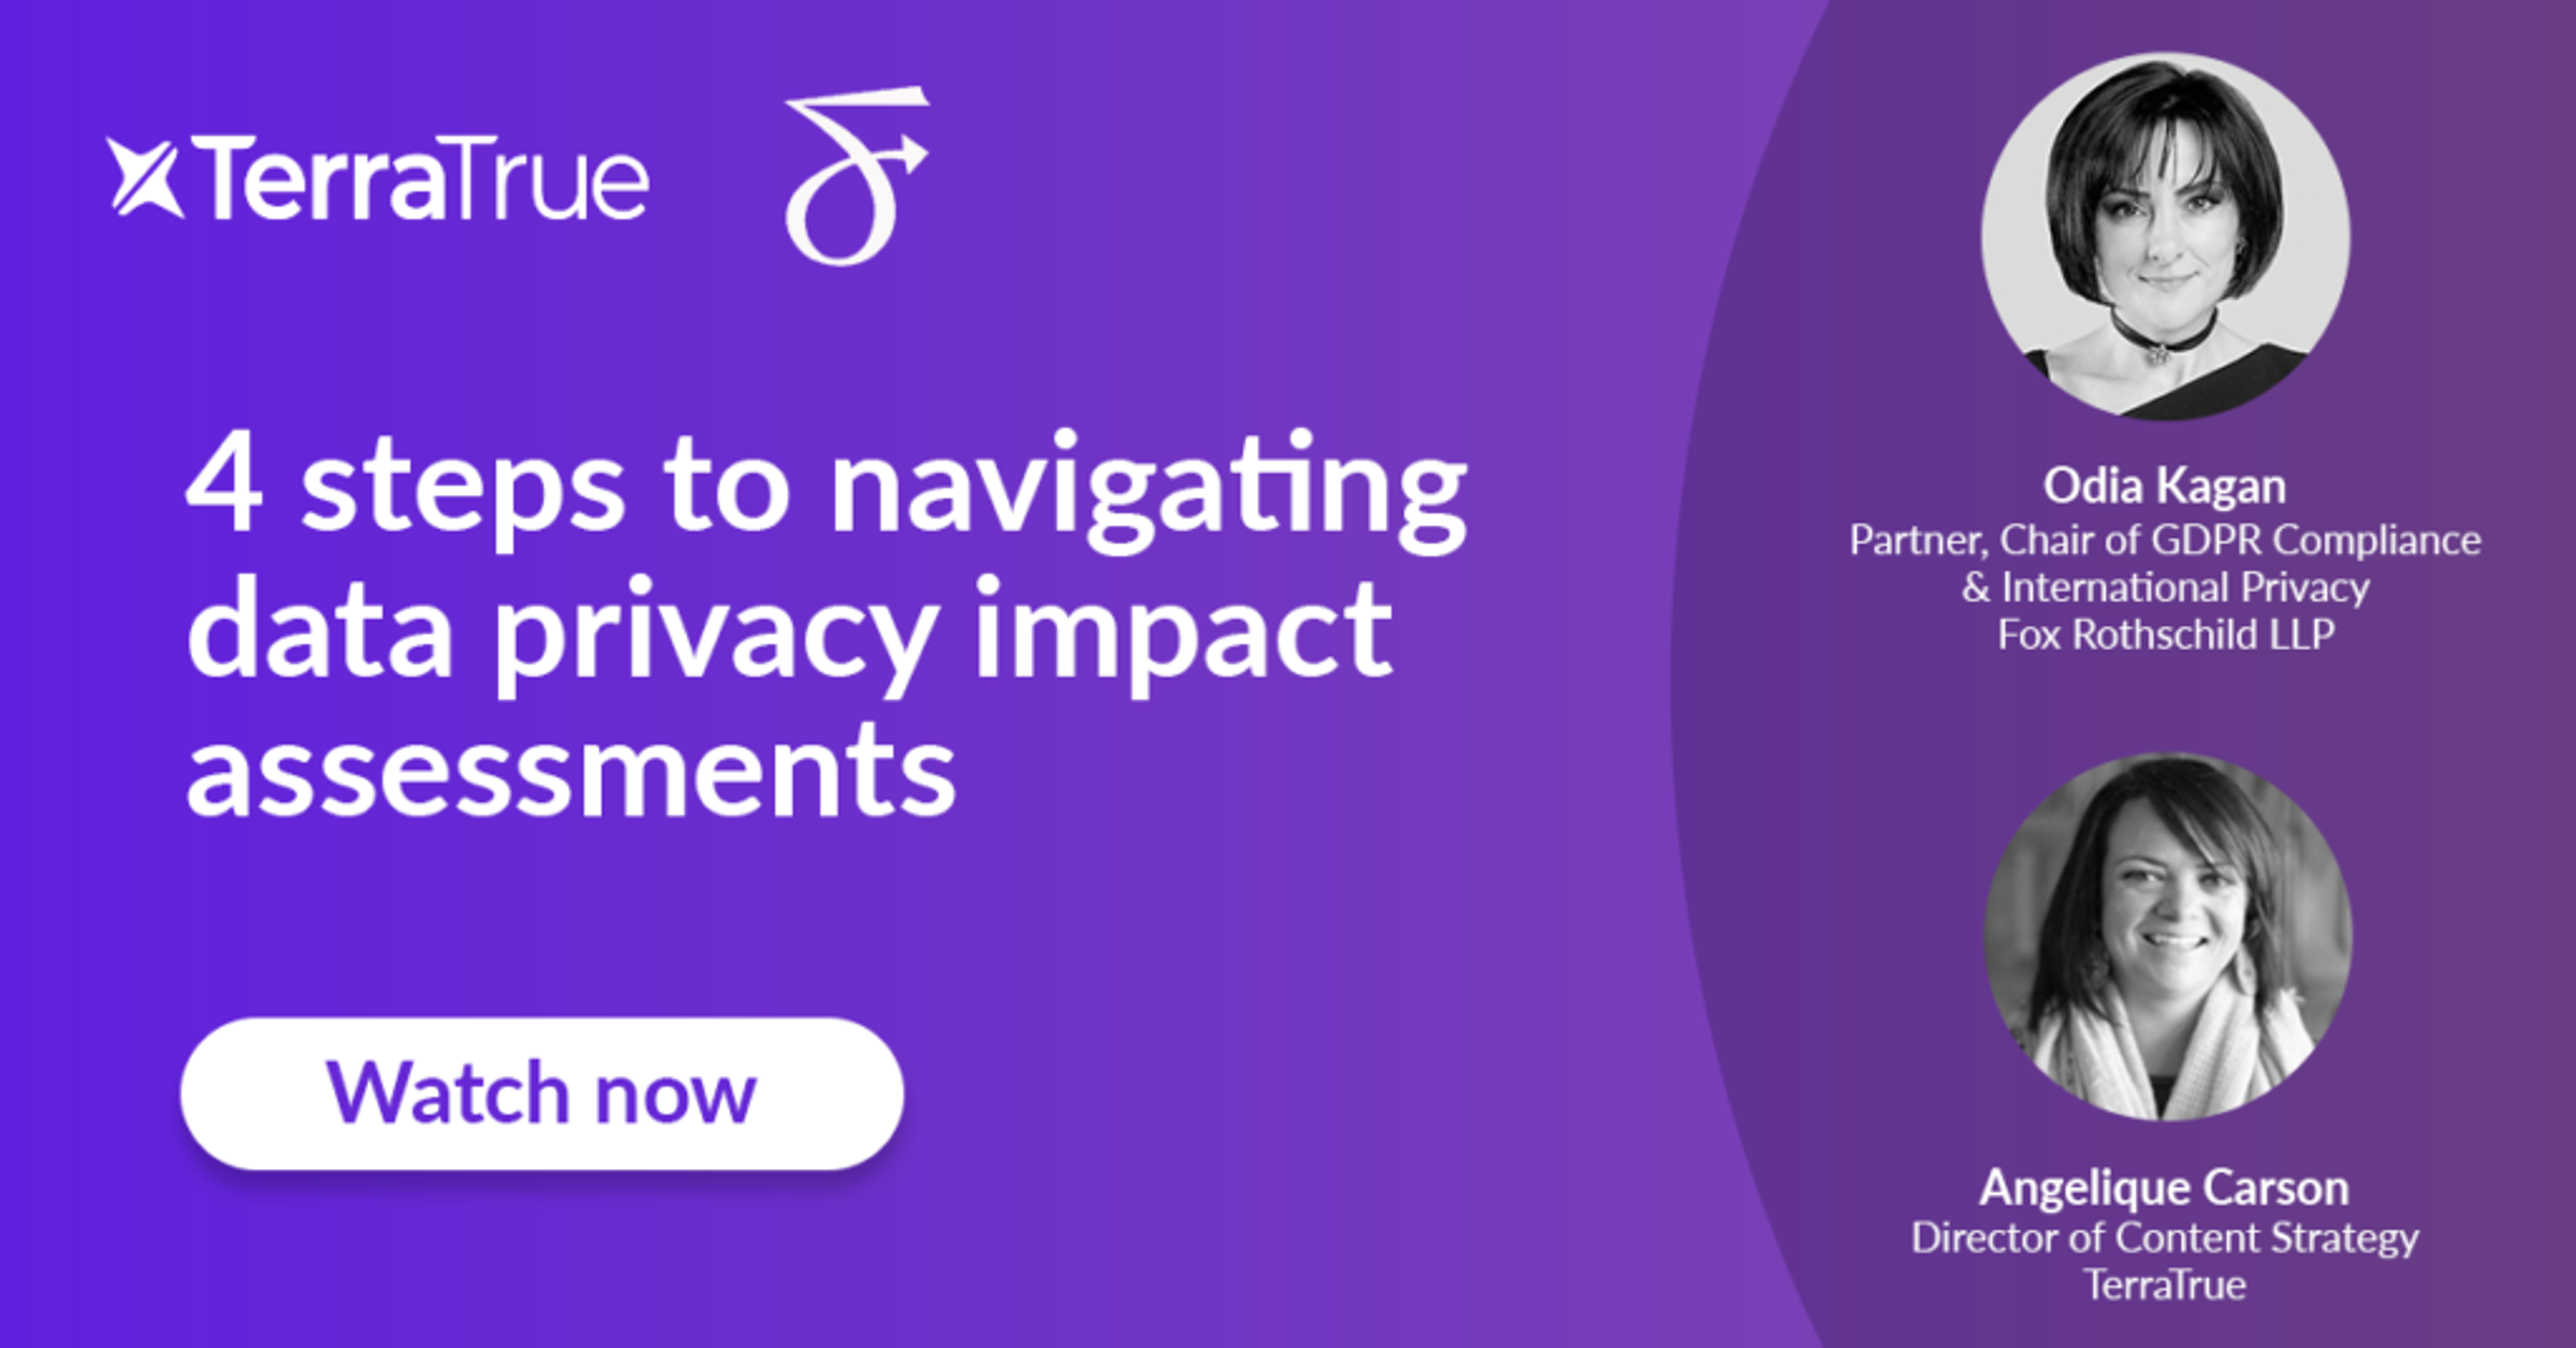 4 steps to navigating data privacy impact assessments